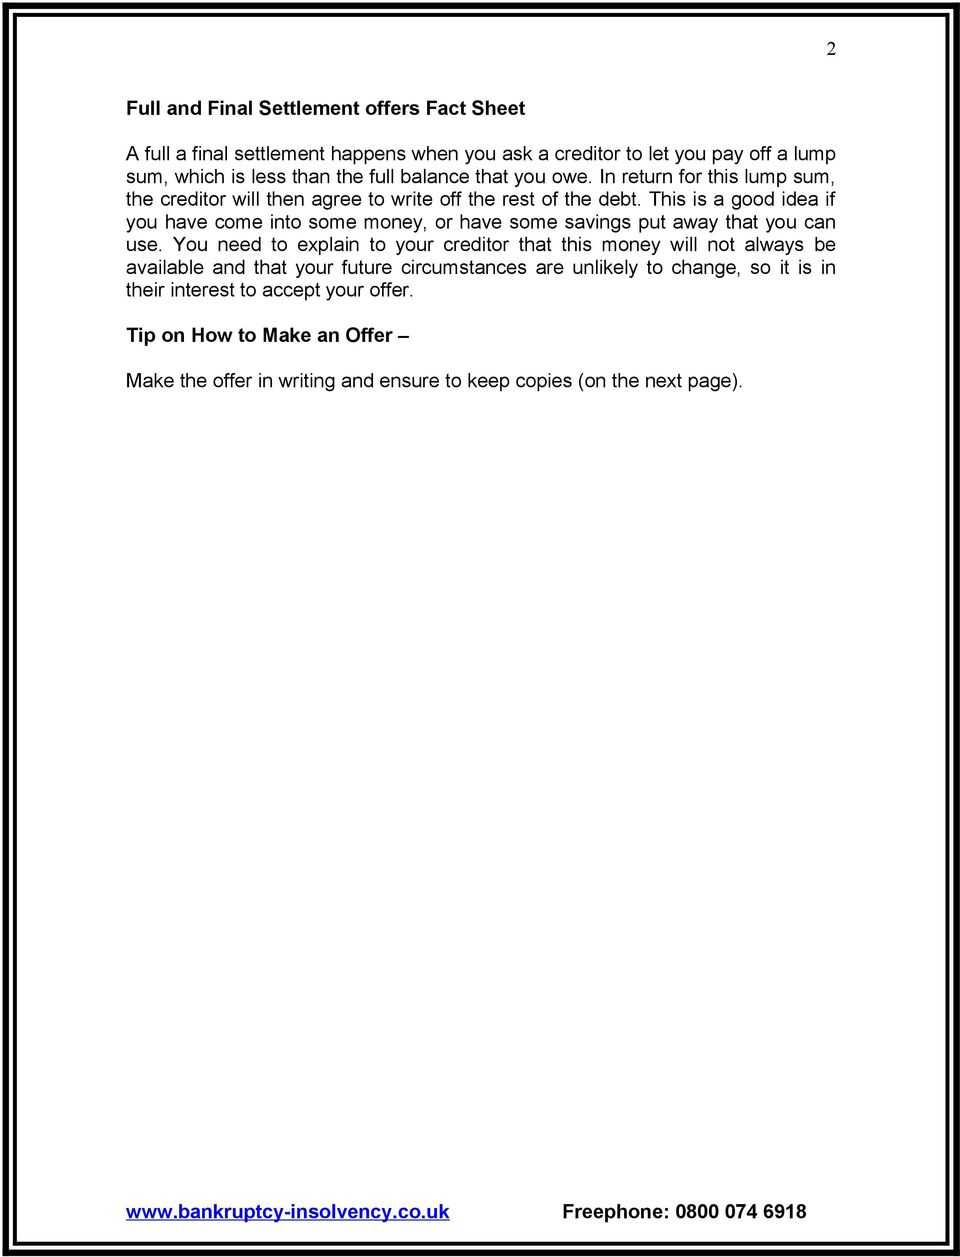 Guide To Full And Final Settlements – Pdf Free Download For Full And Final Settlement Offer Letter Template